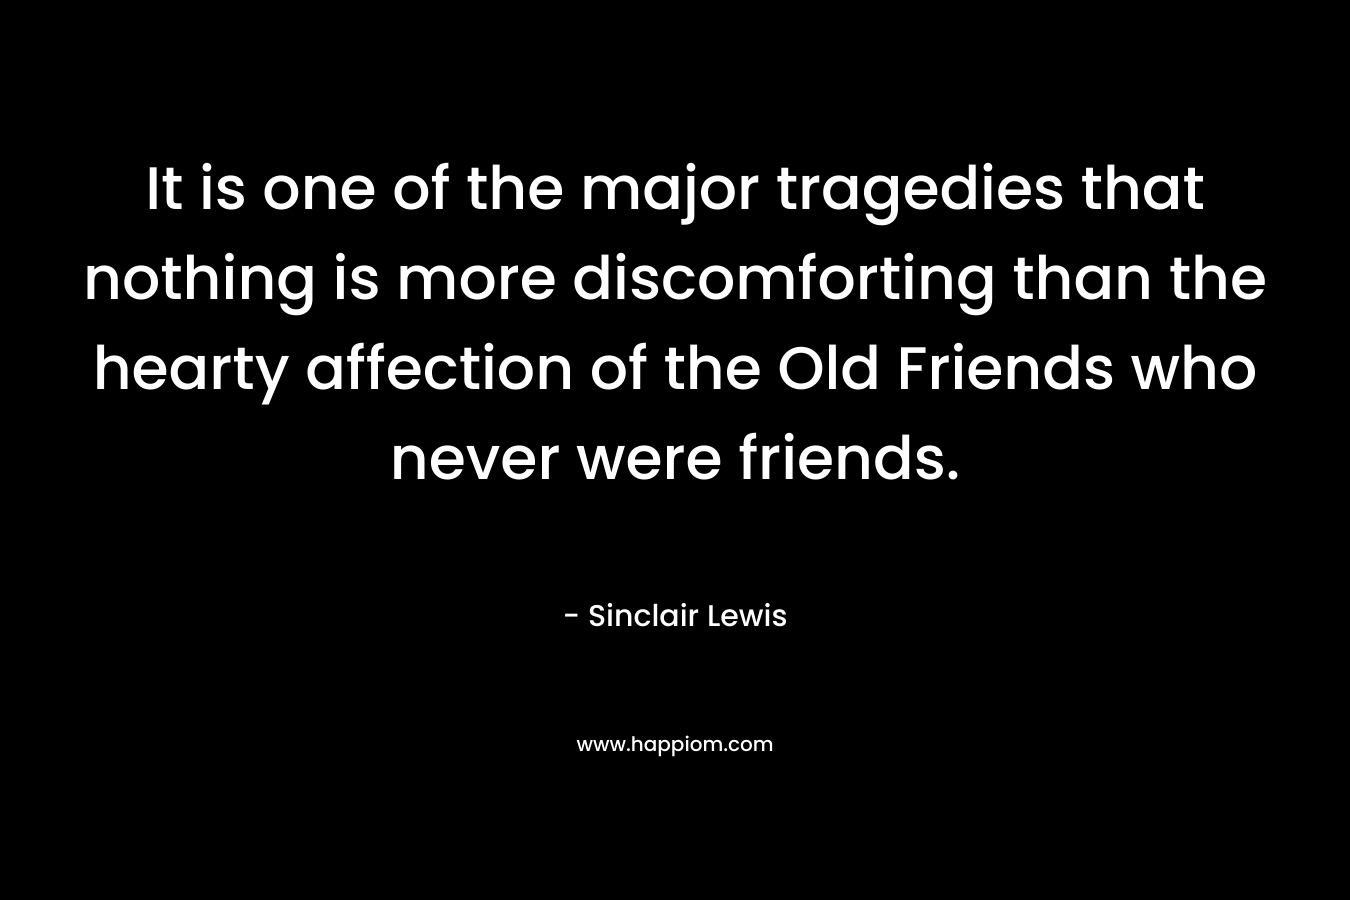 It is one of the major tragedies that nothing is more discomforting than the hearty affection of the Old Friends who never were friends.